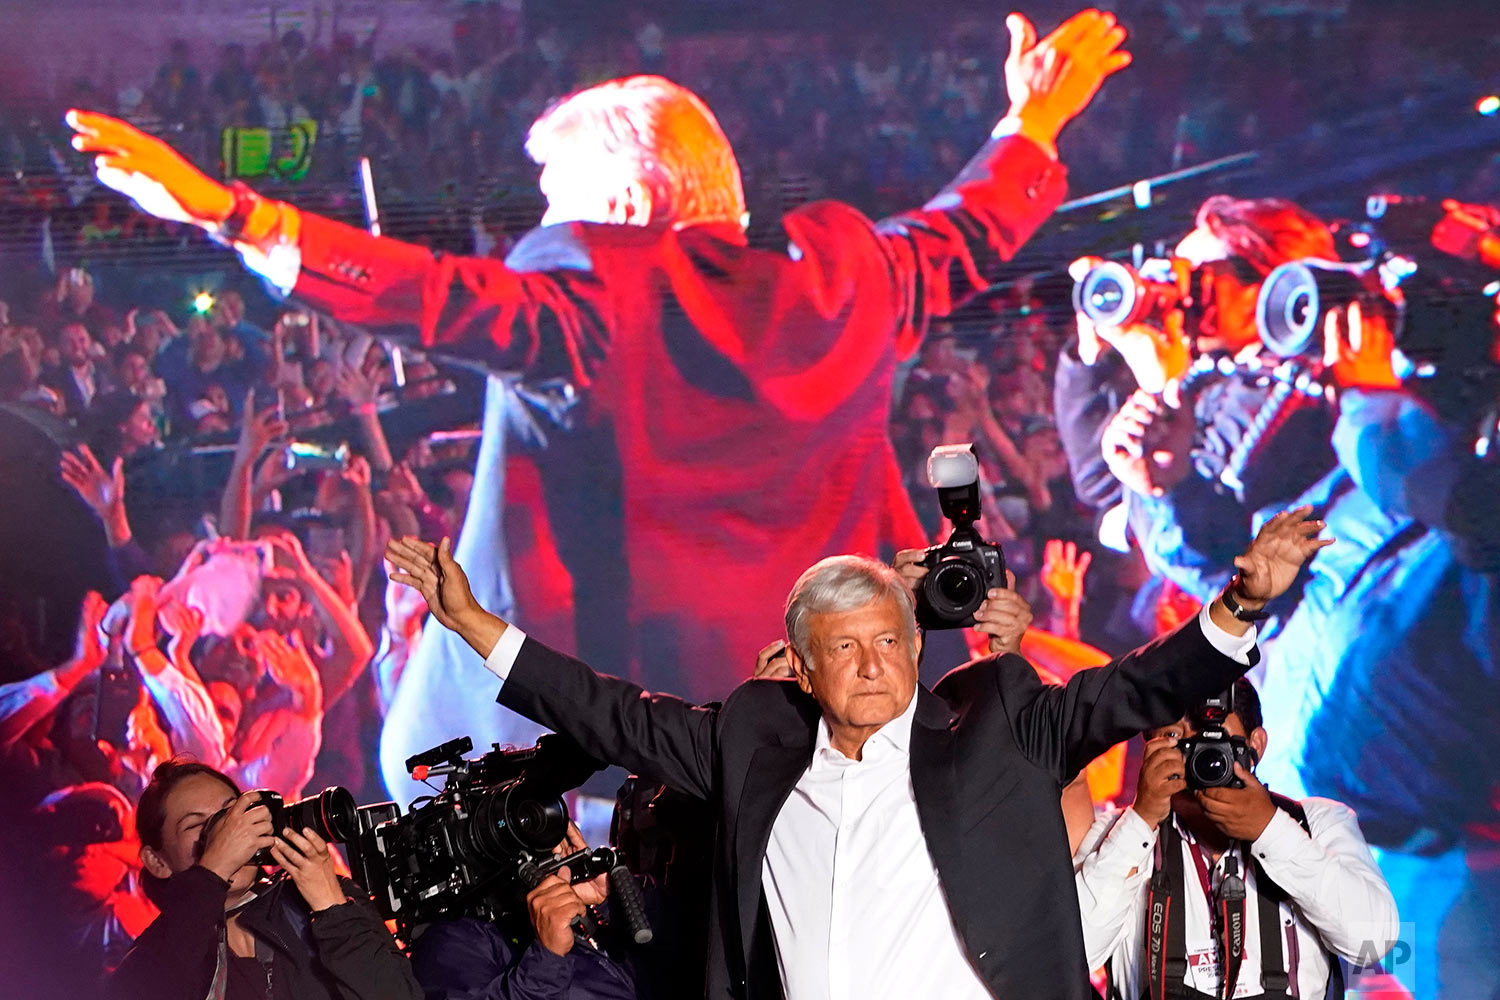  Presidential candidate Andres Manuel Lopez Obrador arrives for his closing campaign rally at Azteca stadium in Mexico City, June 27, 2018, before winning in a landslide. (AP Photo/Ramon Espinosa) 